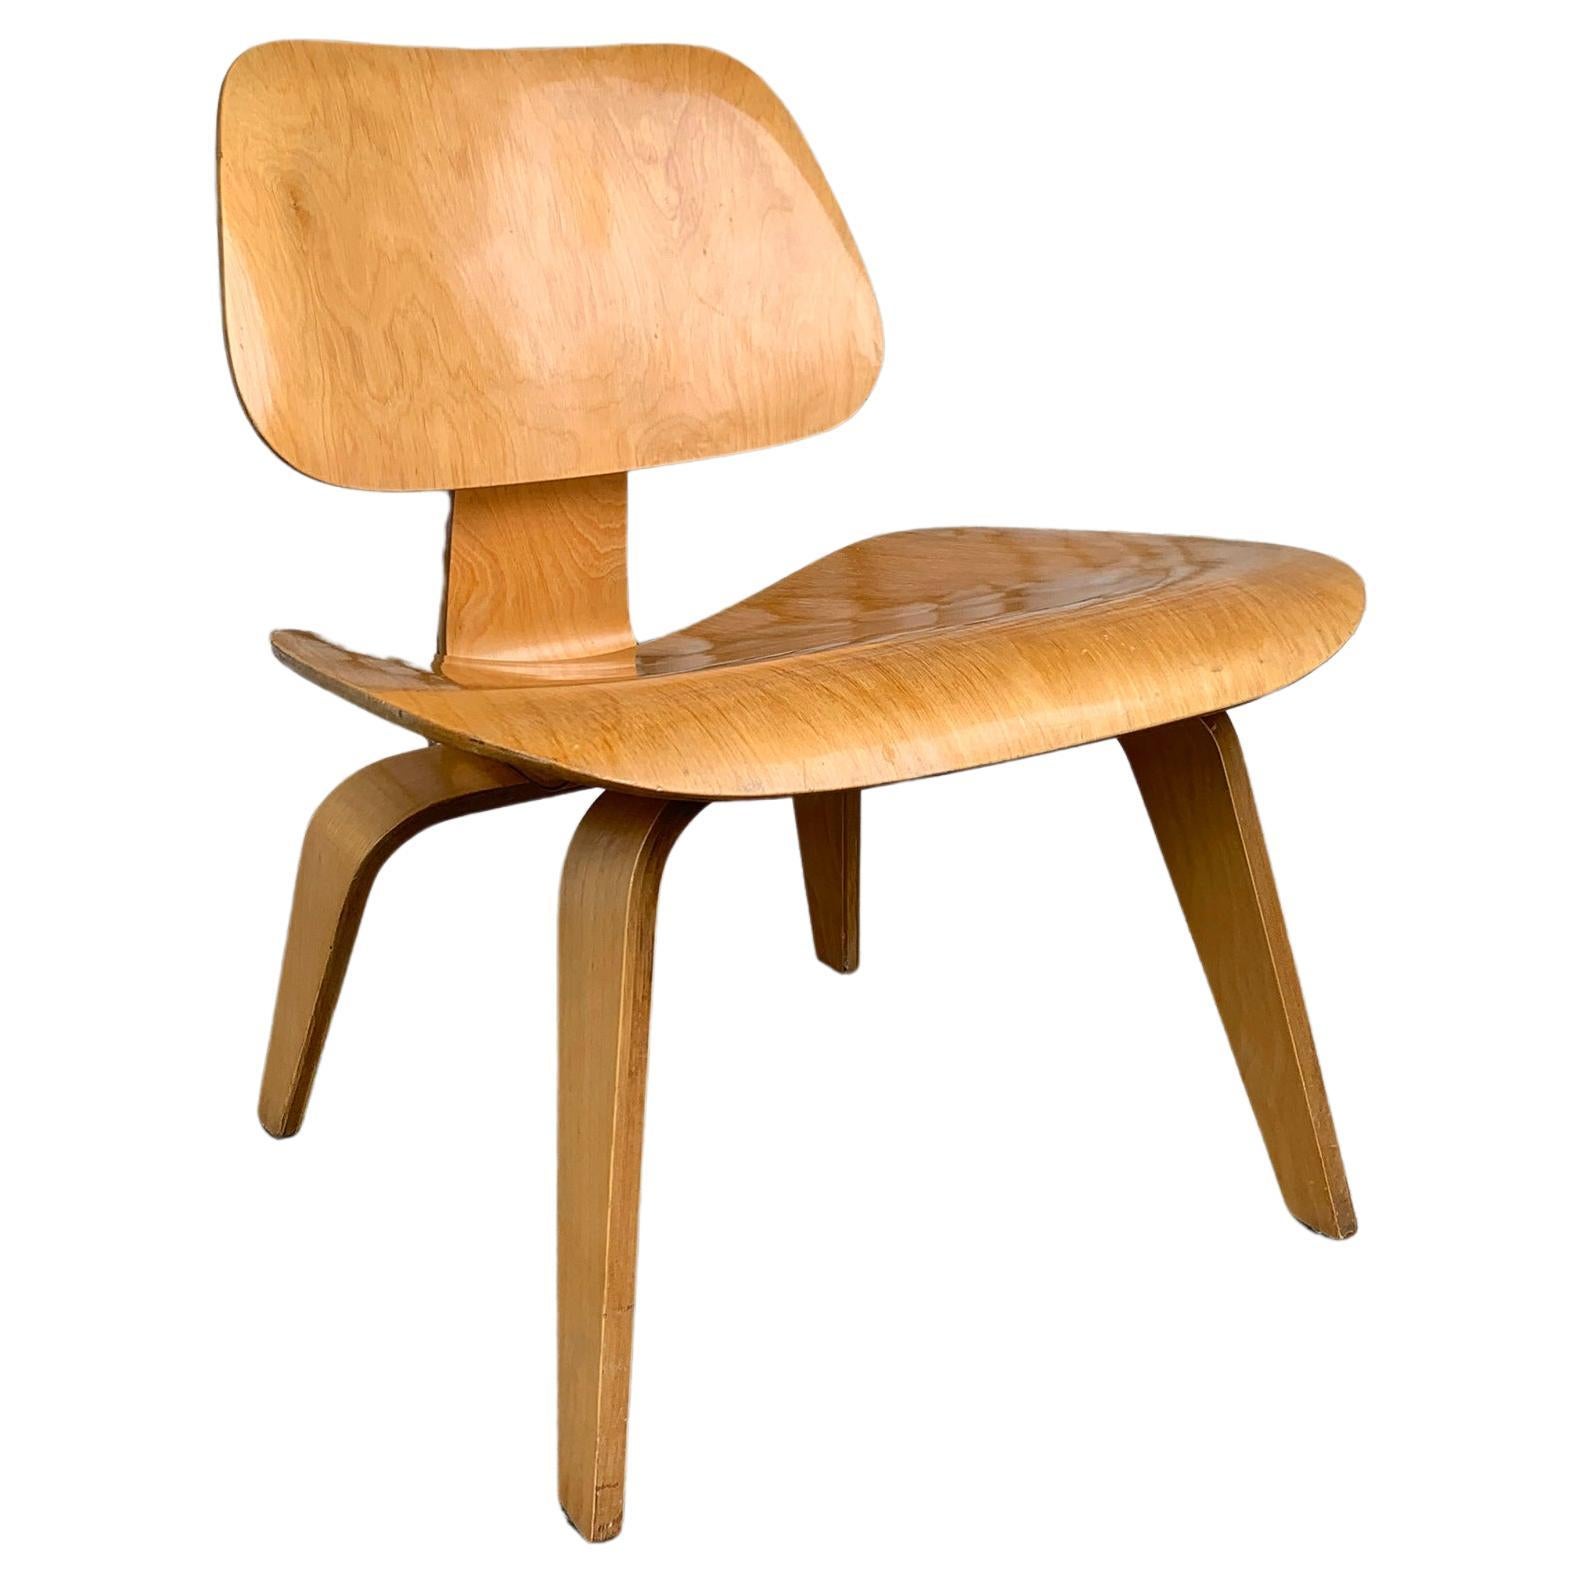 Early LCW Lounge Chair in Birch by Charles & Ray Eames, Herman Miller, 1950s For Sale